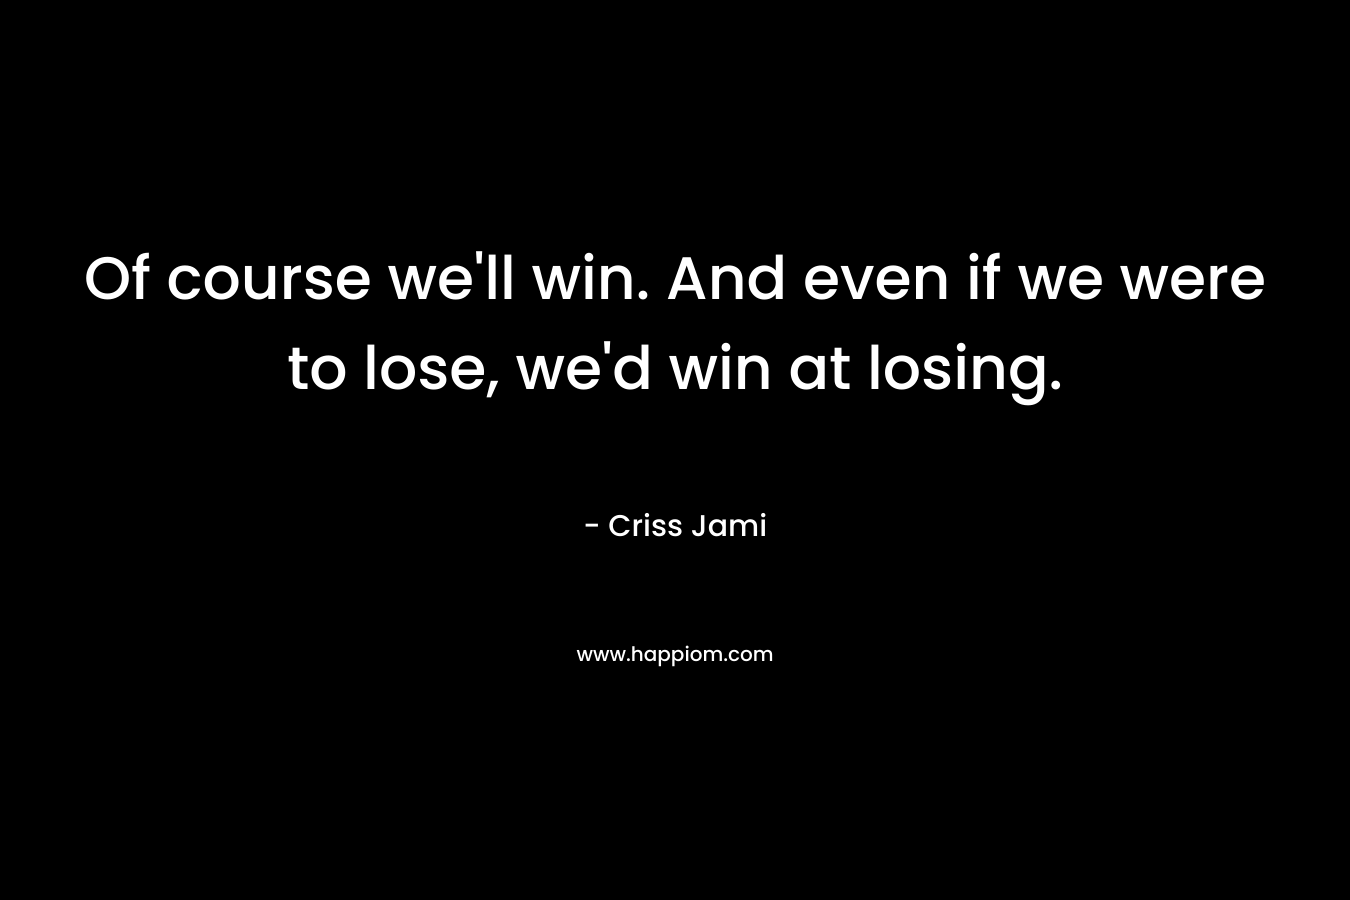 Of course we'll win. And even if we were to lose, we'd win at losing.